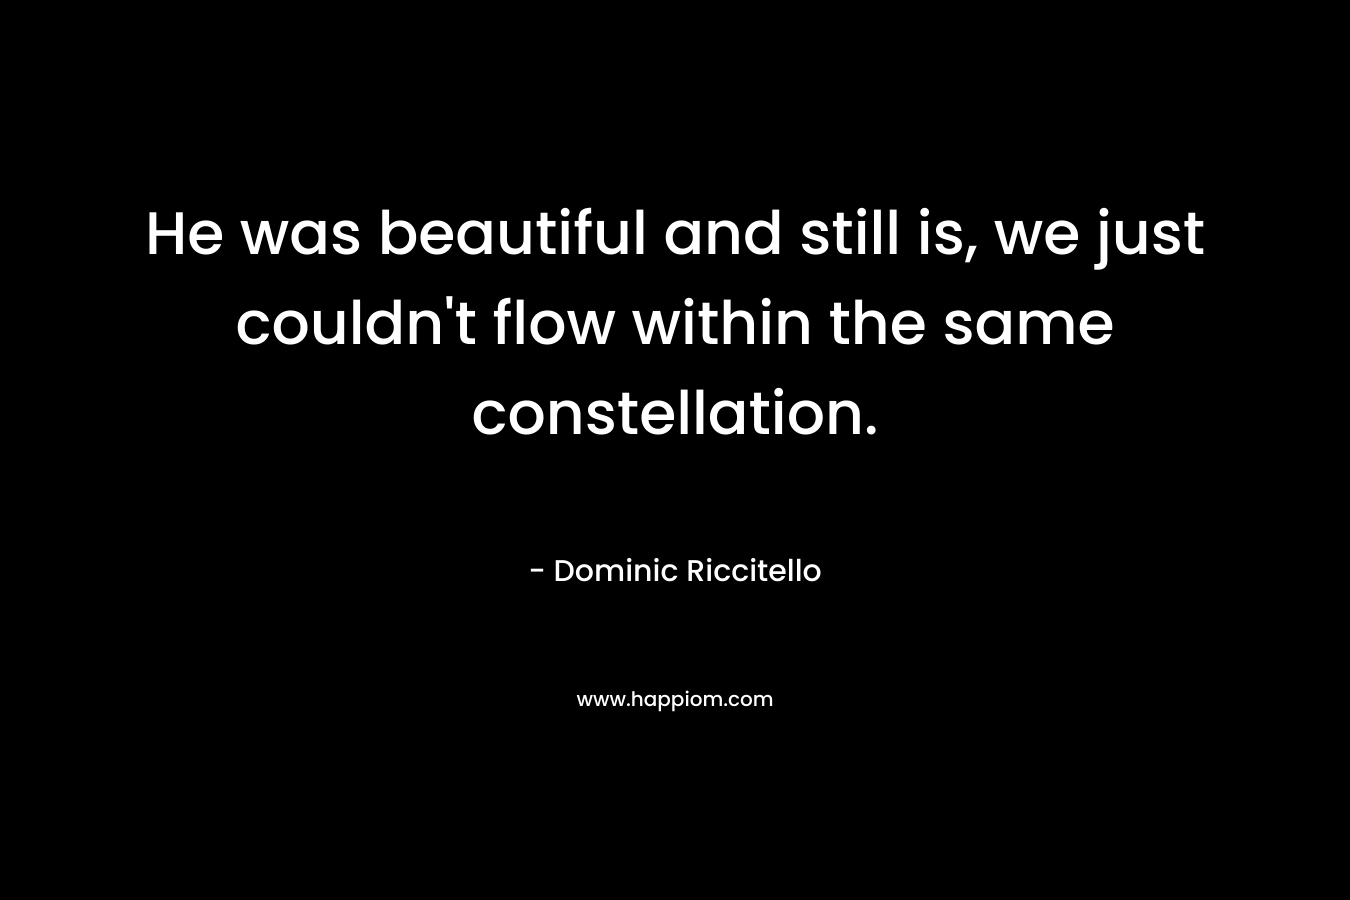 He was beautiful and still is, we just couldn't flow within the same constellation.